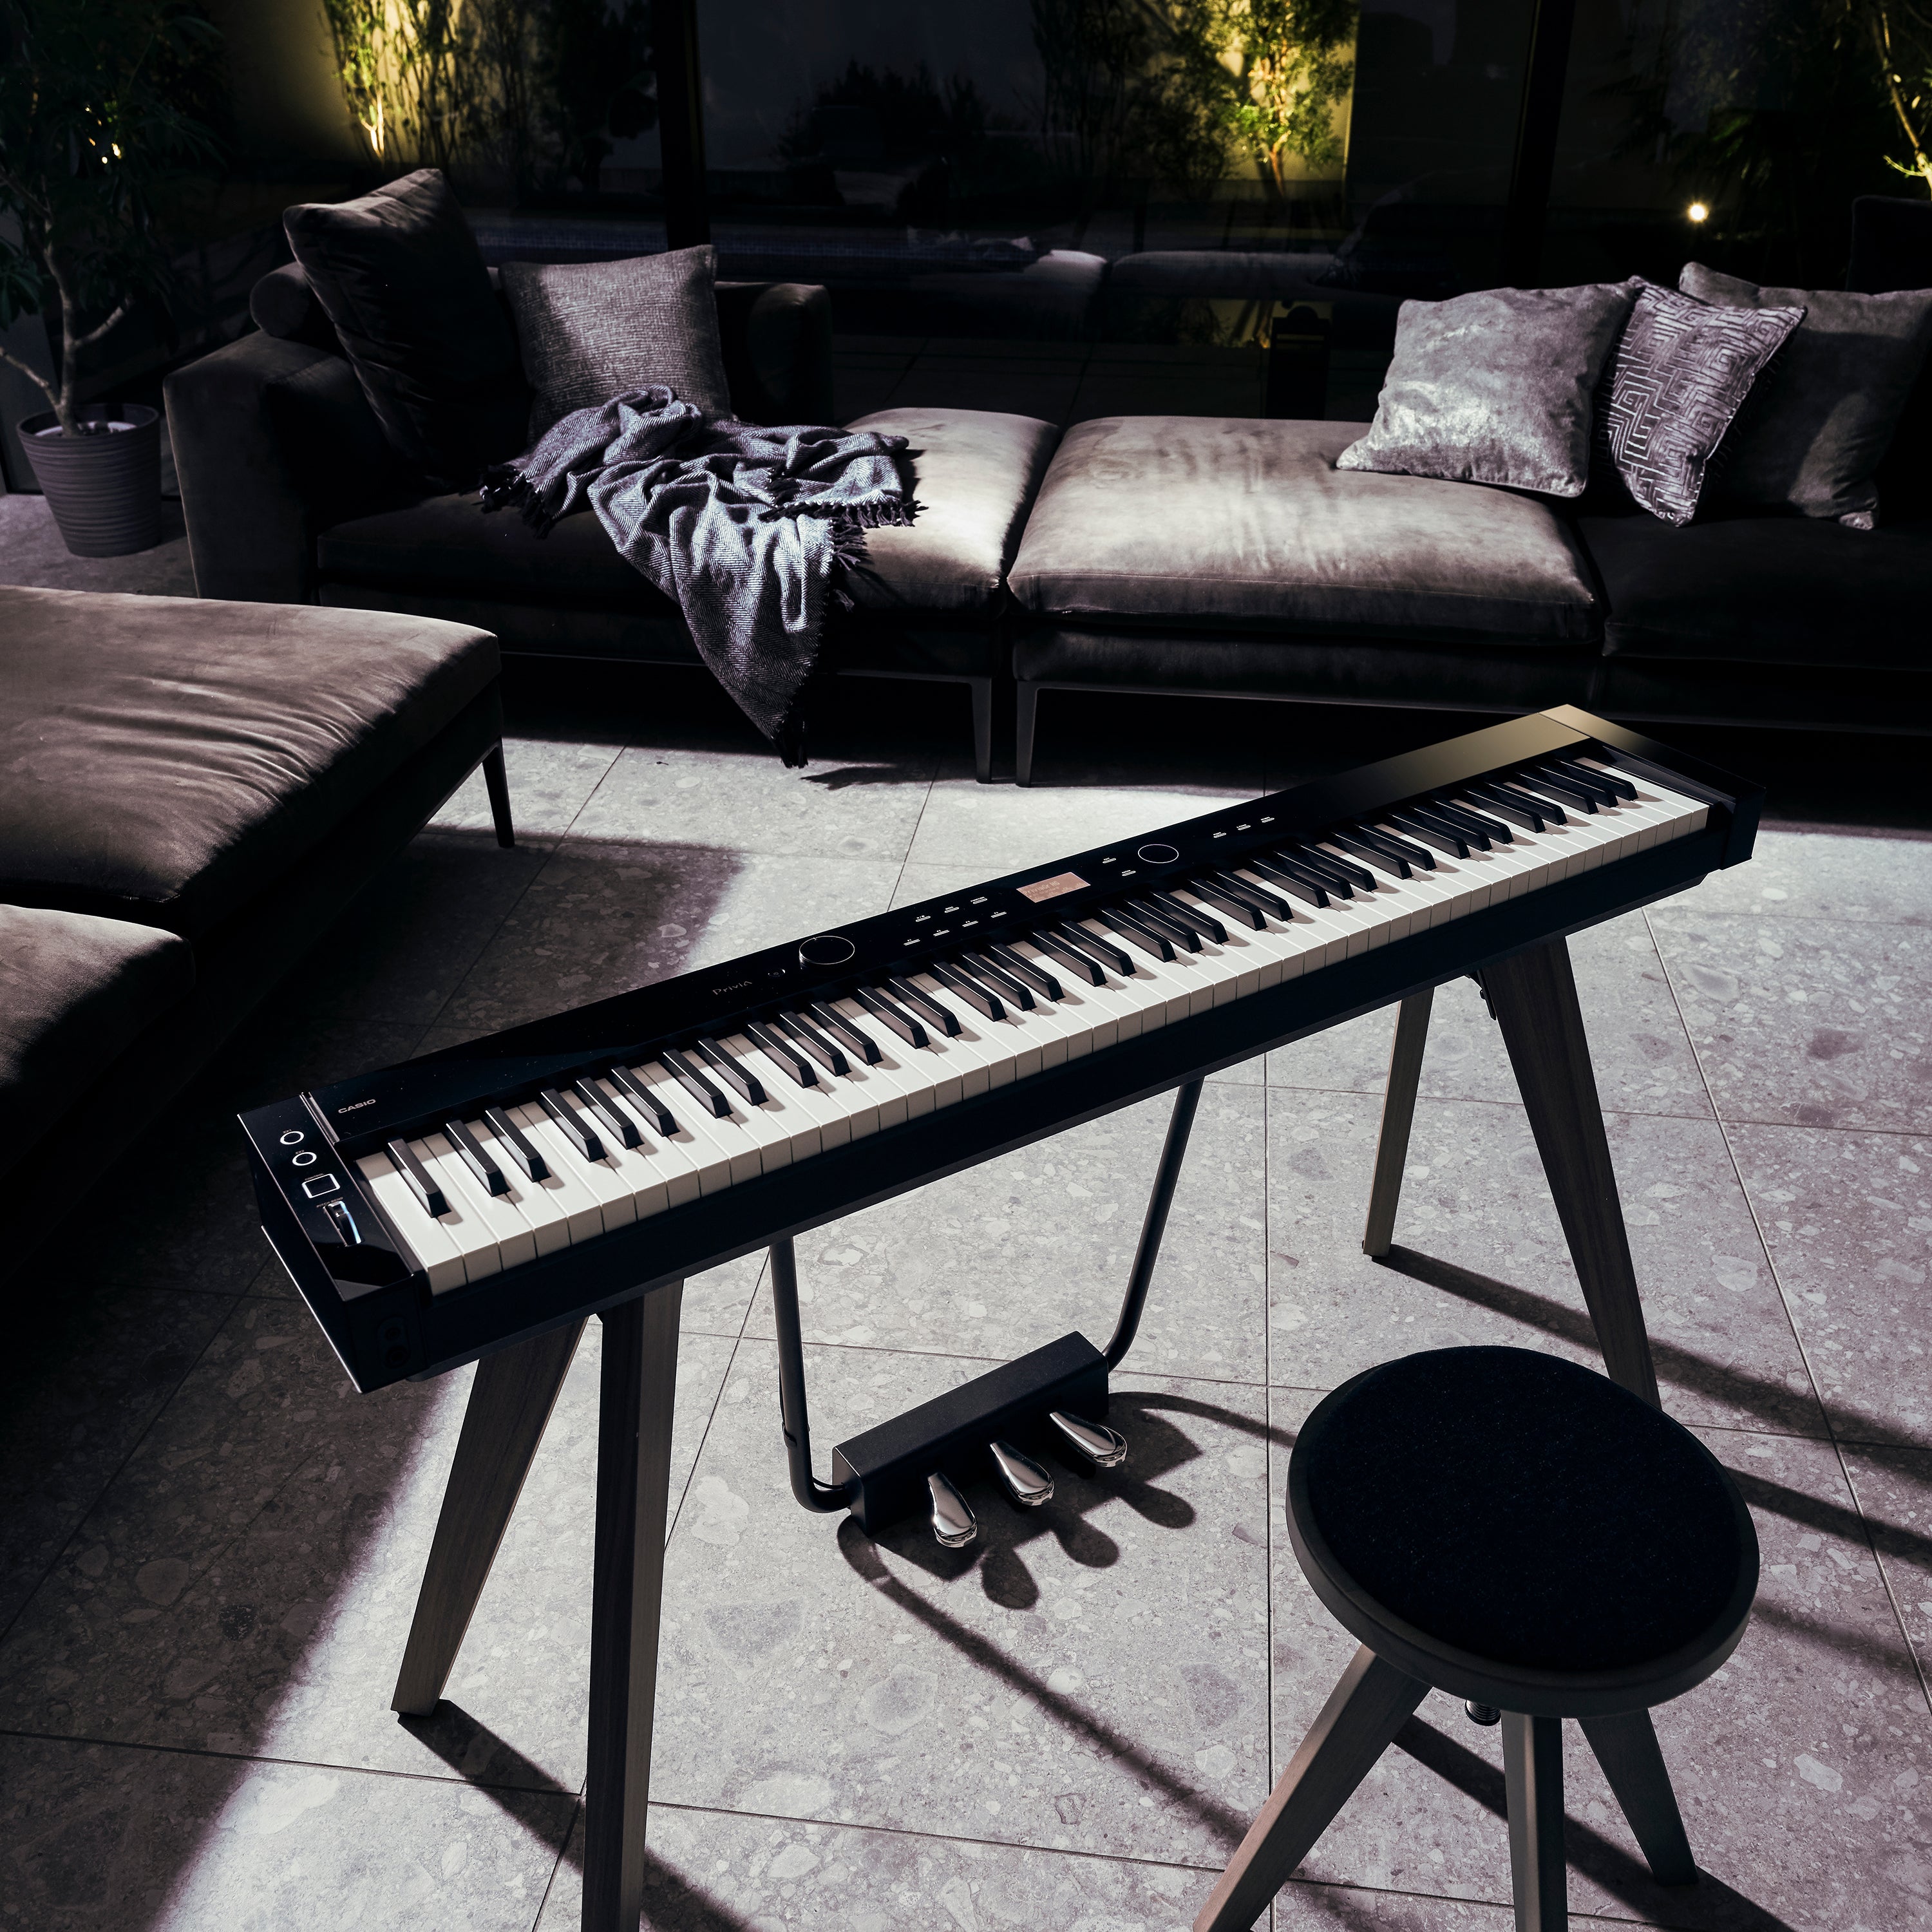 A black Casio PX-S7000 digital piano in a stylish living room